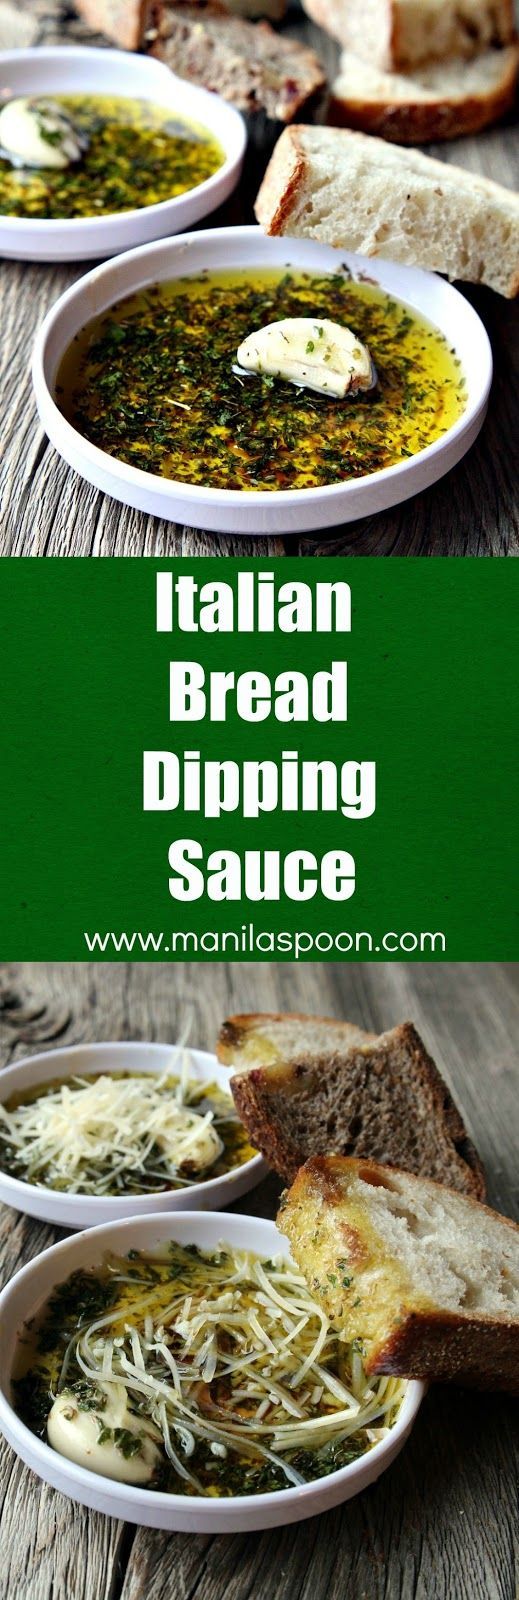 Restaurant-style sauce with Italian herbs and balsamic vinegar perfect for dipping your favorite crust